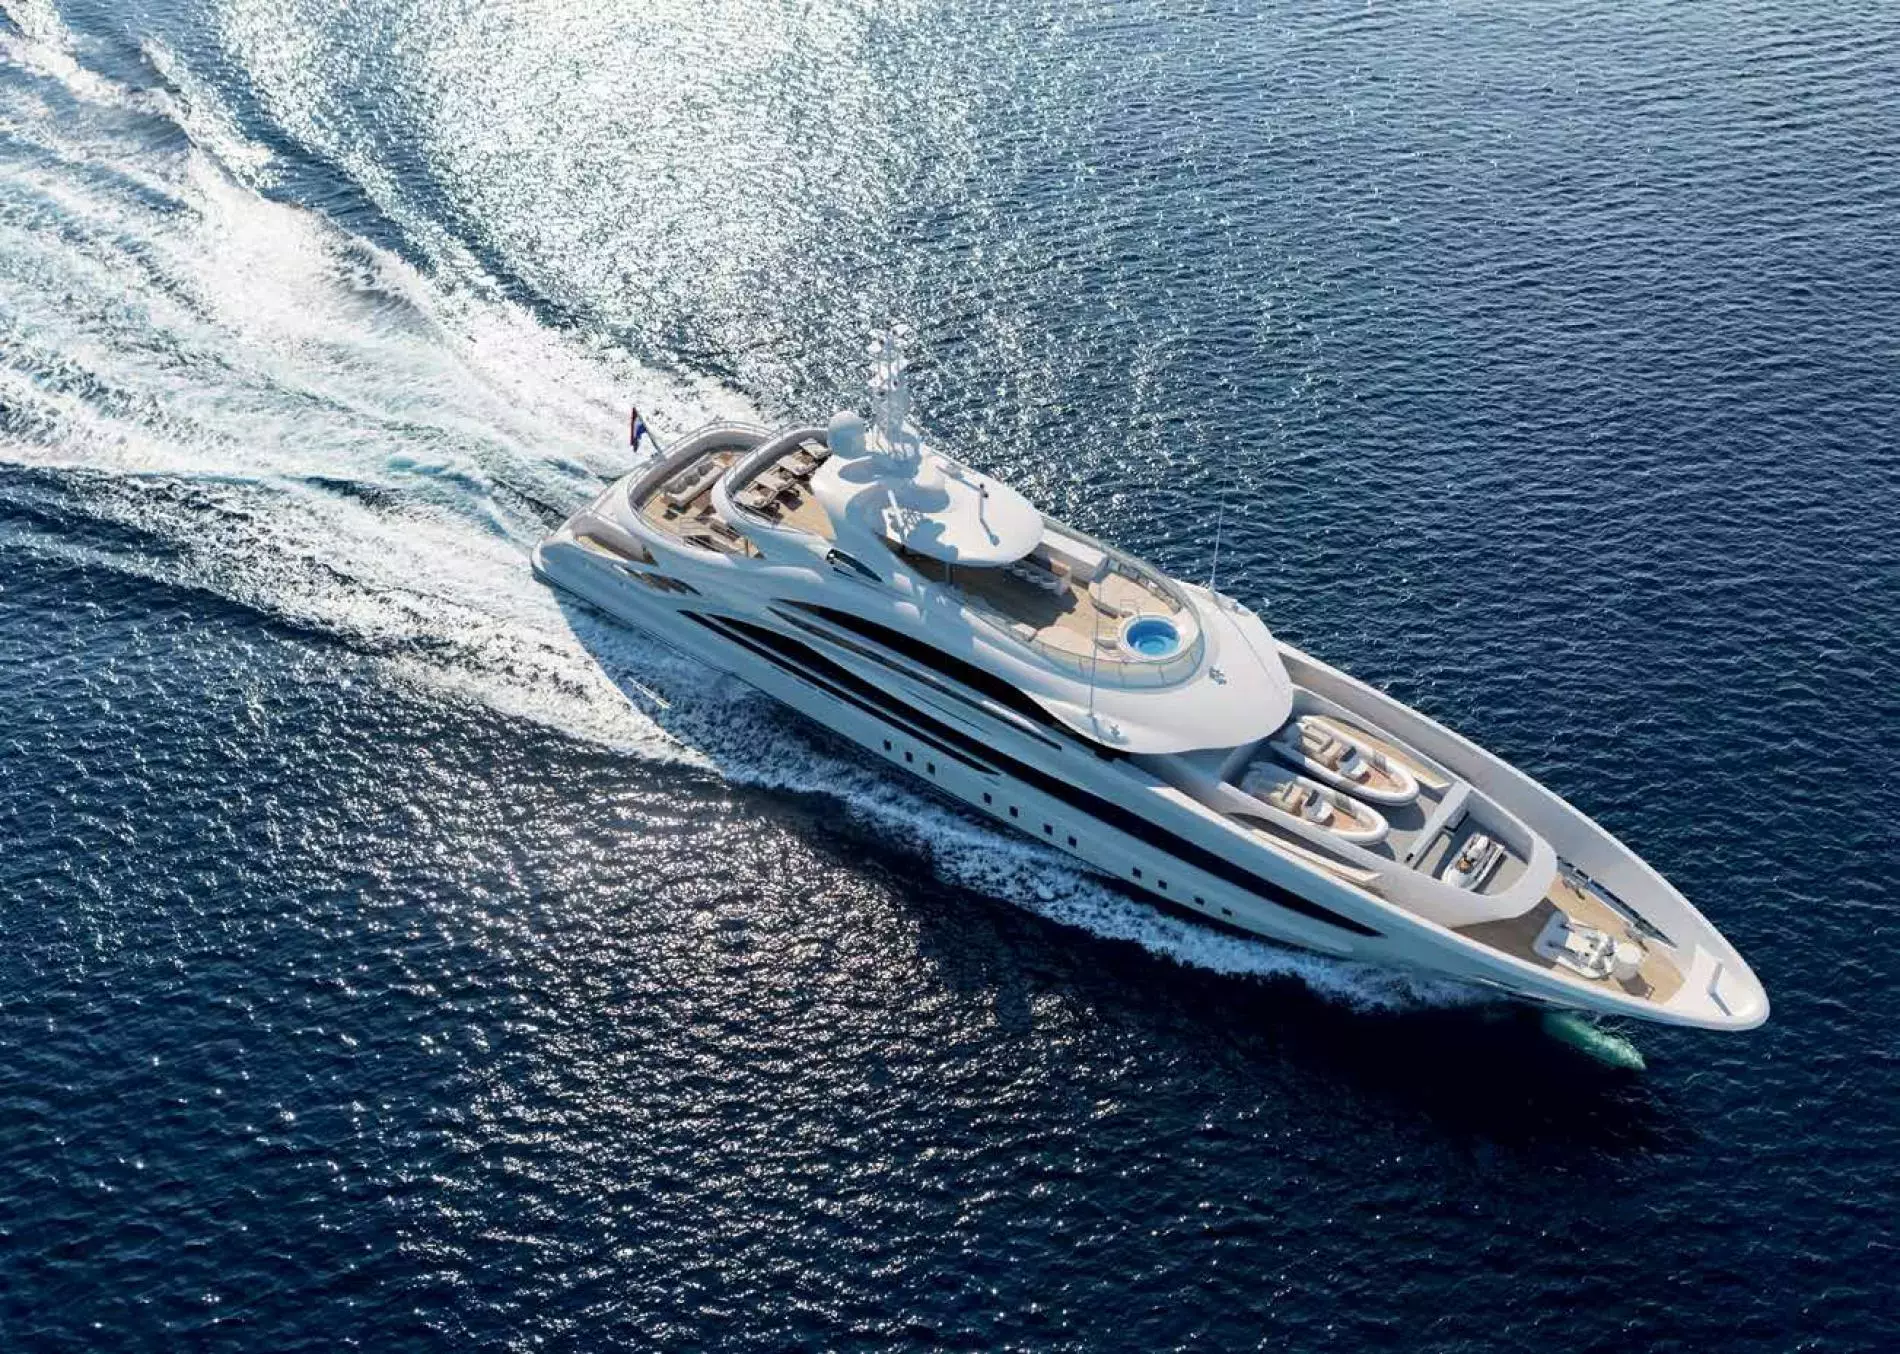 Arkadia by Heesen - Top rates for a Charter of a private Superyacht in Anguilla